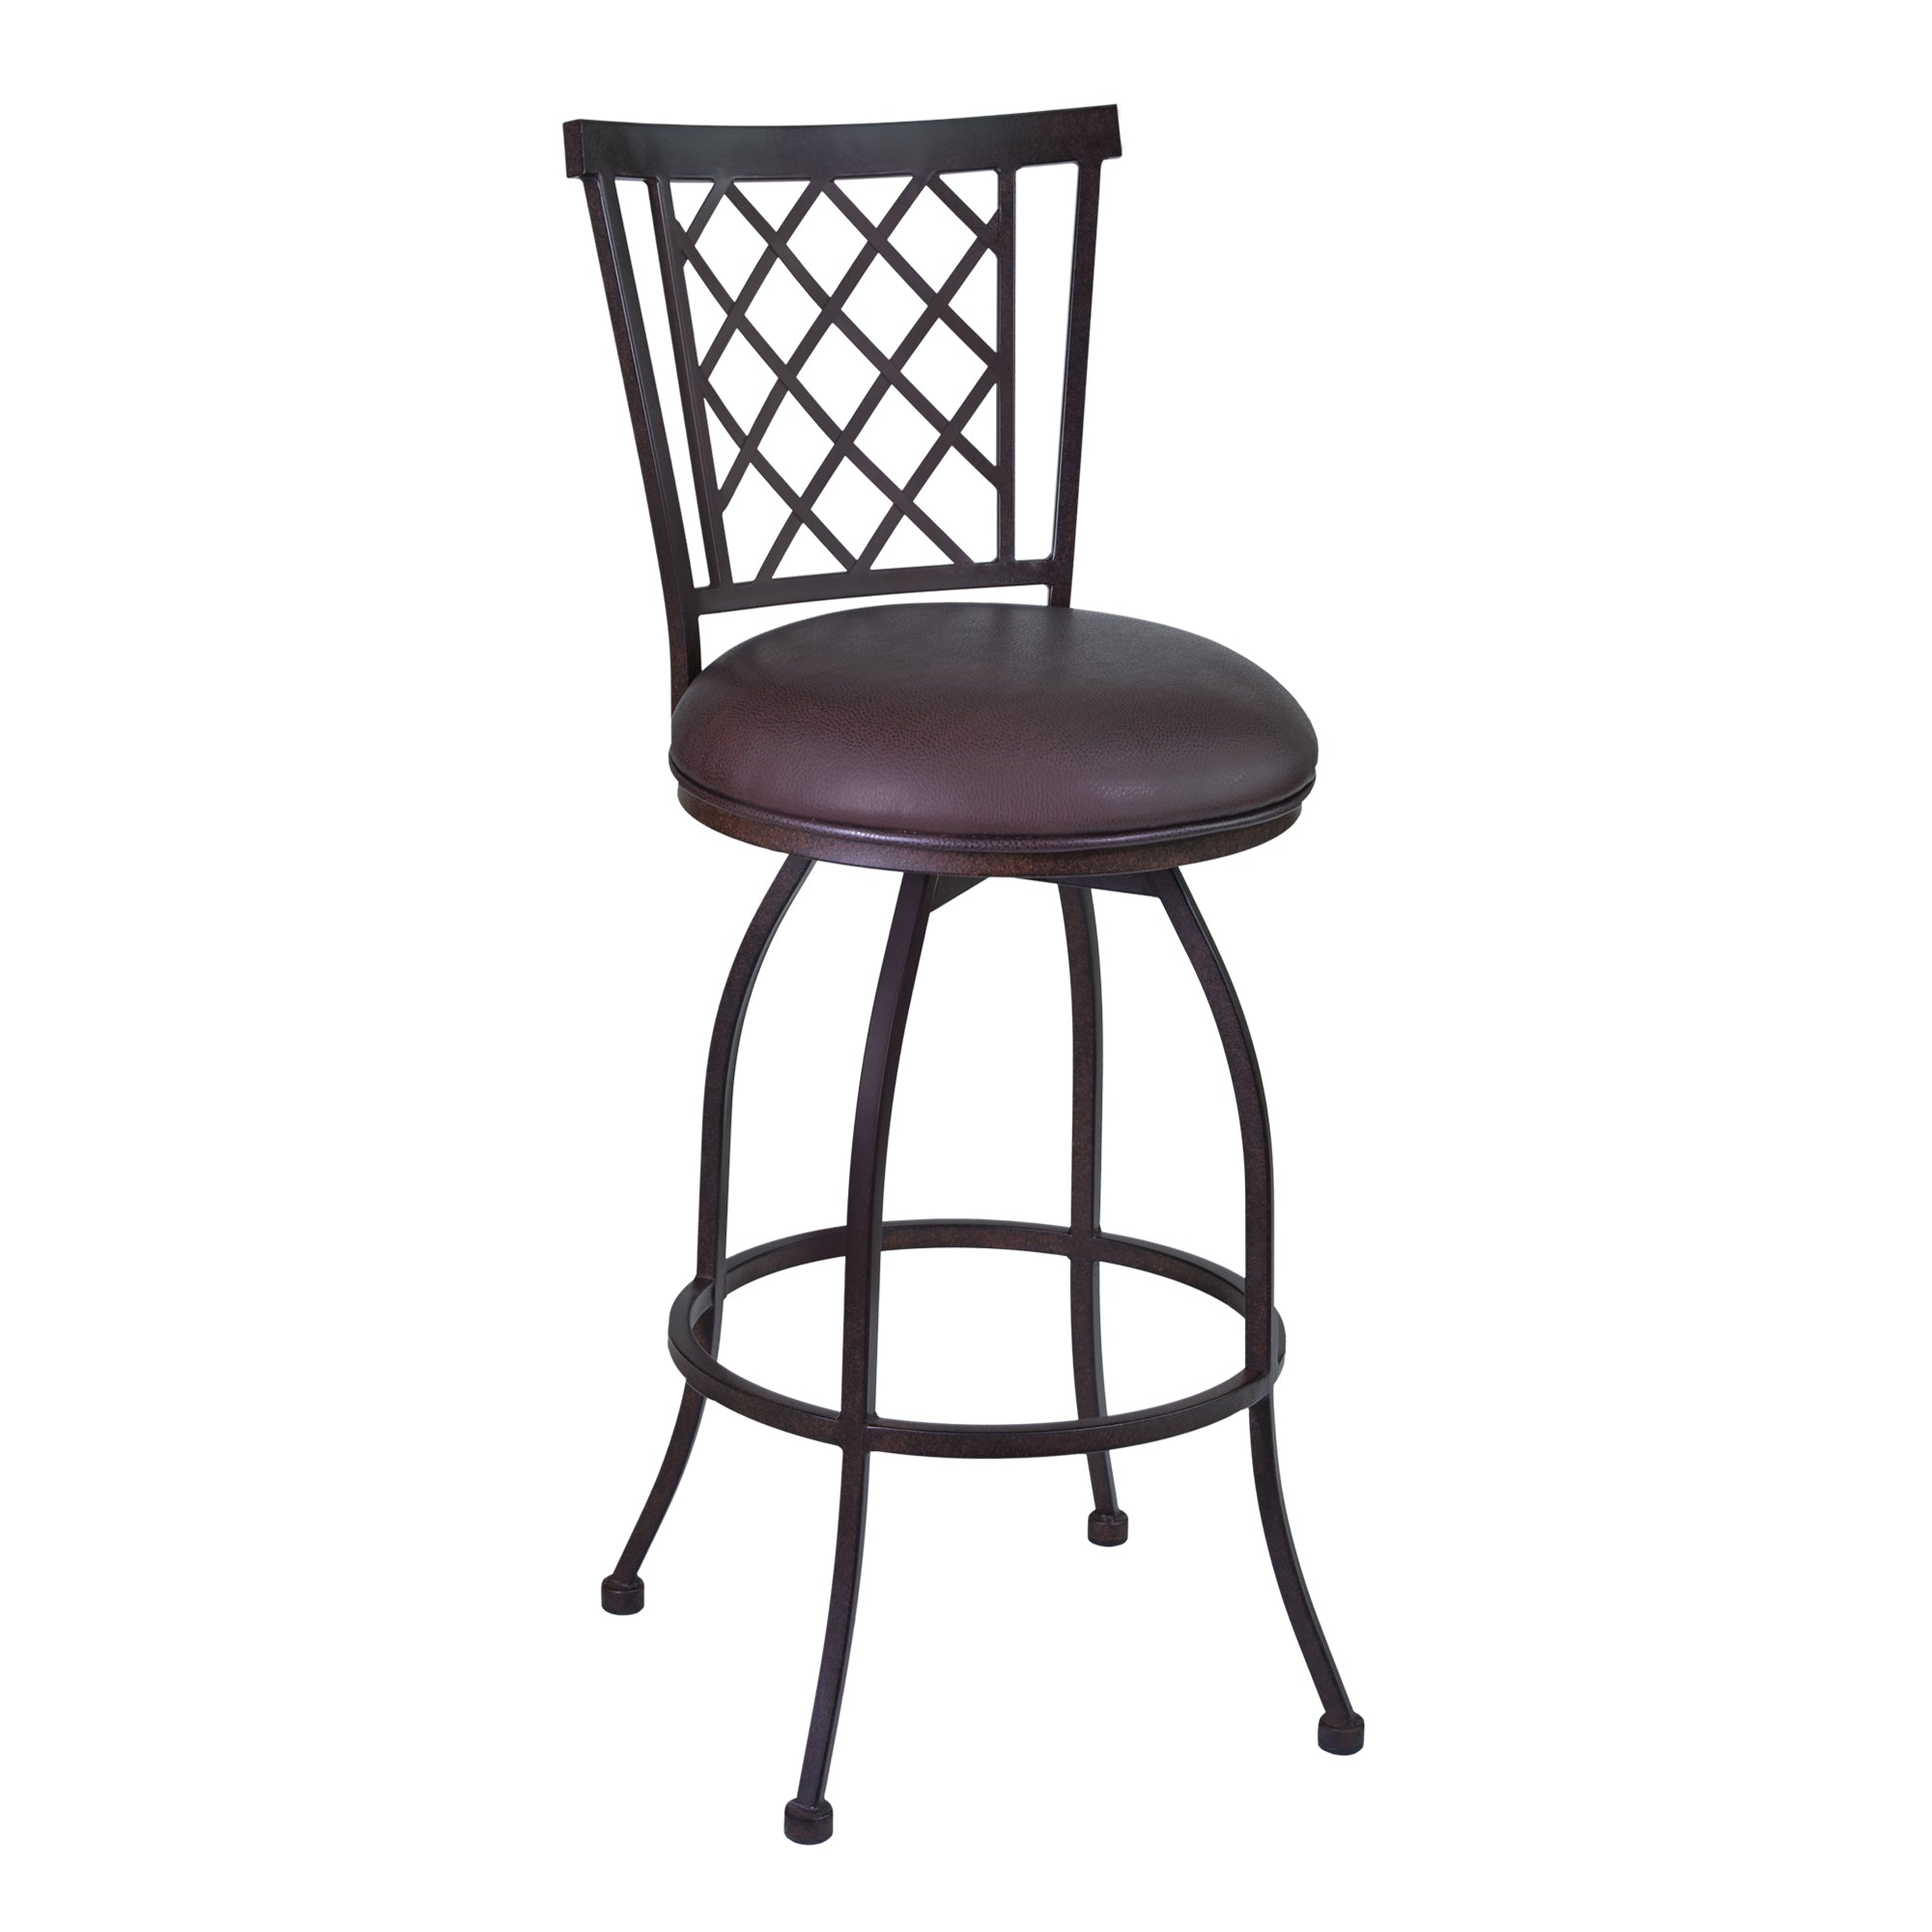 Armen Living Lcre30babr Reno 30" Bar Height Barstool In Auburn Bay Finish With Brown Faux Leather